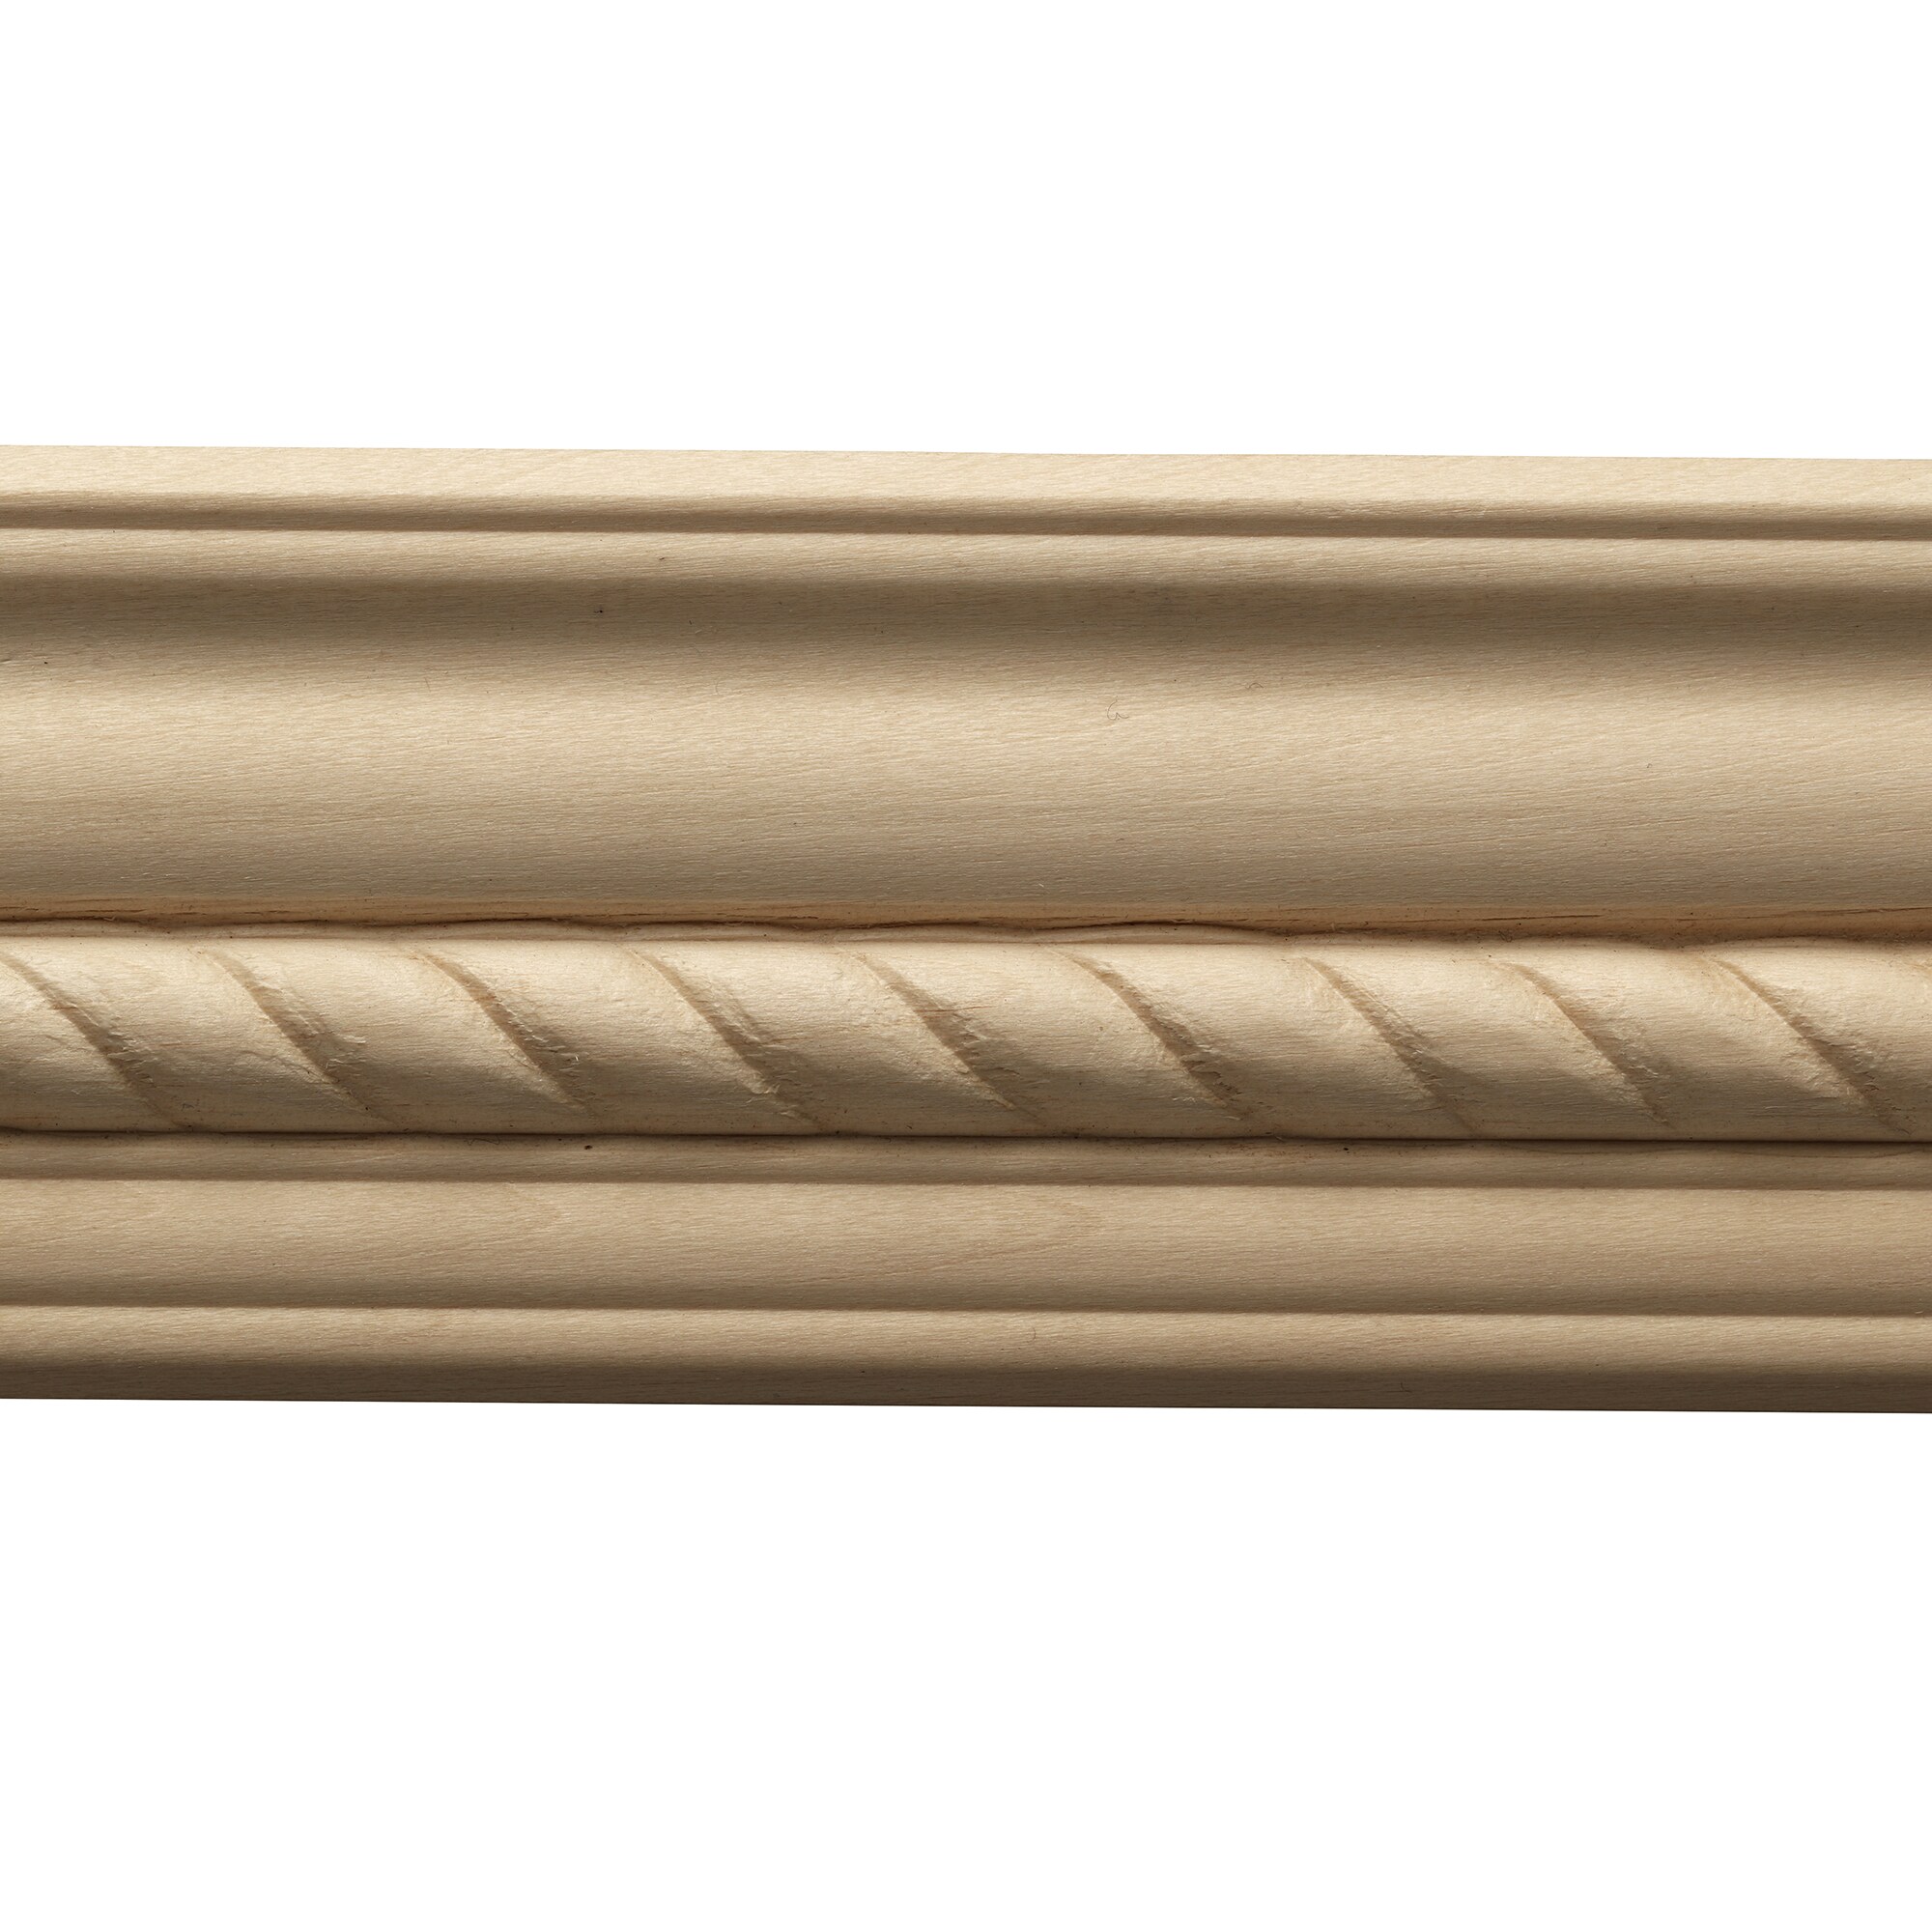 Small Rope Moulding, 2 1/2w x 1 1/4d x 4' length, Sold in 4